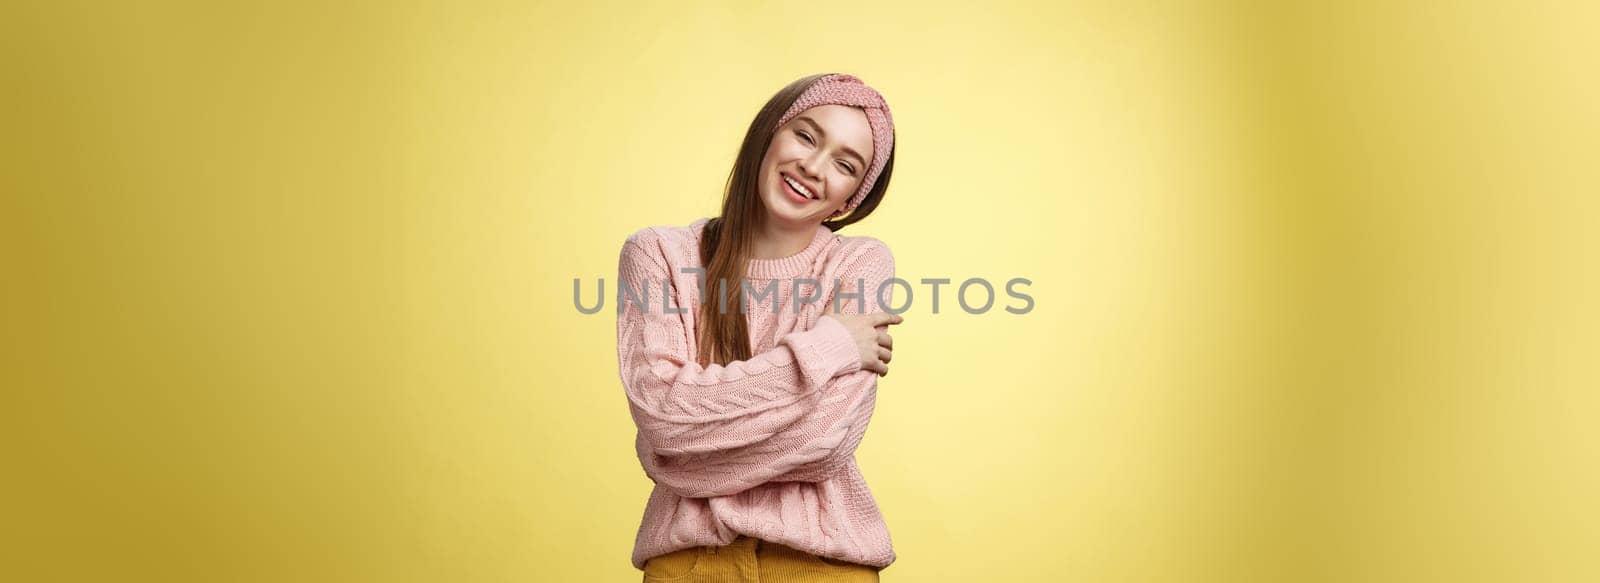 Cozy charming friendly young smiling girl in knitted warm comfortable sweater, grinning joyfully tilt head emracing herself, crossing arms, hugging feeling safe and happy, posing against yellow wall.